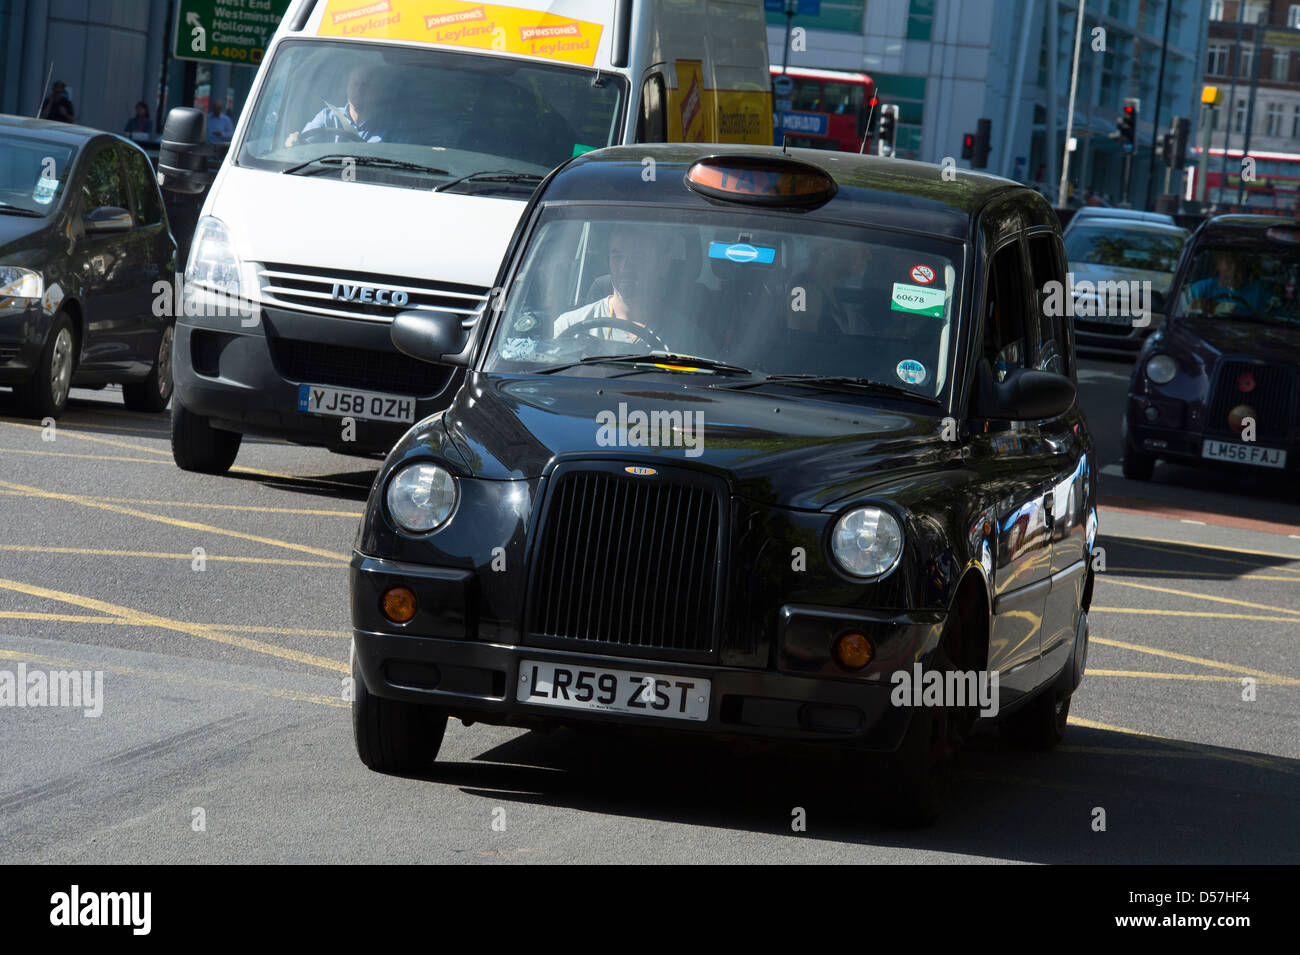 Black taxi cab driving along a street in the city of London, England. Stock Photo